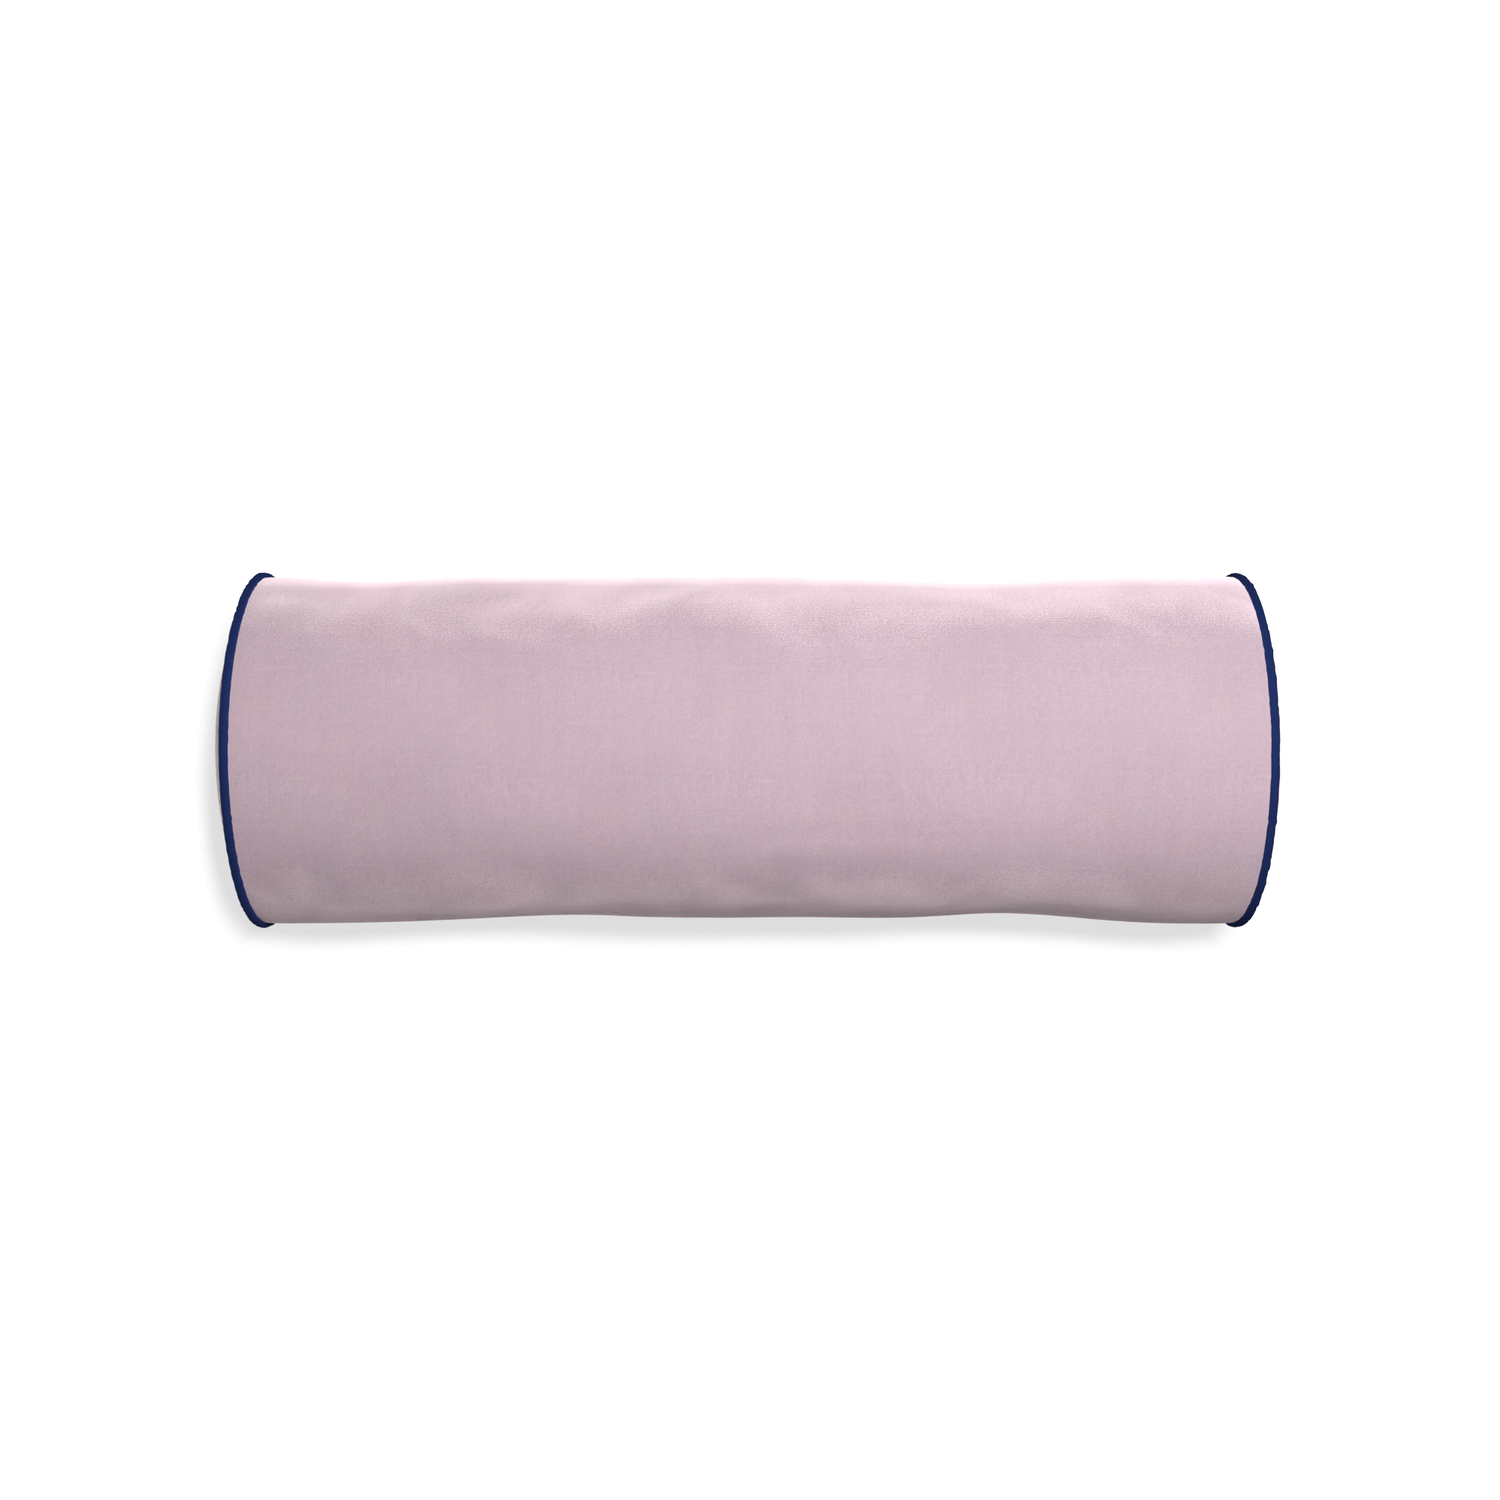 Bolster lilac velvet custom pillow with midnight piping on white background